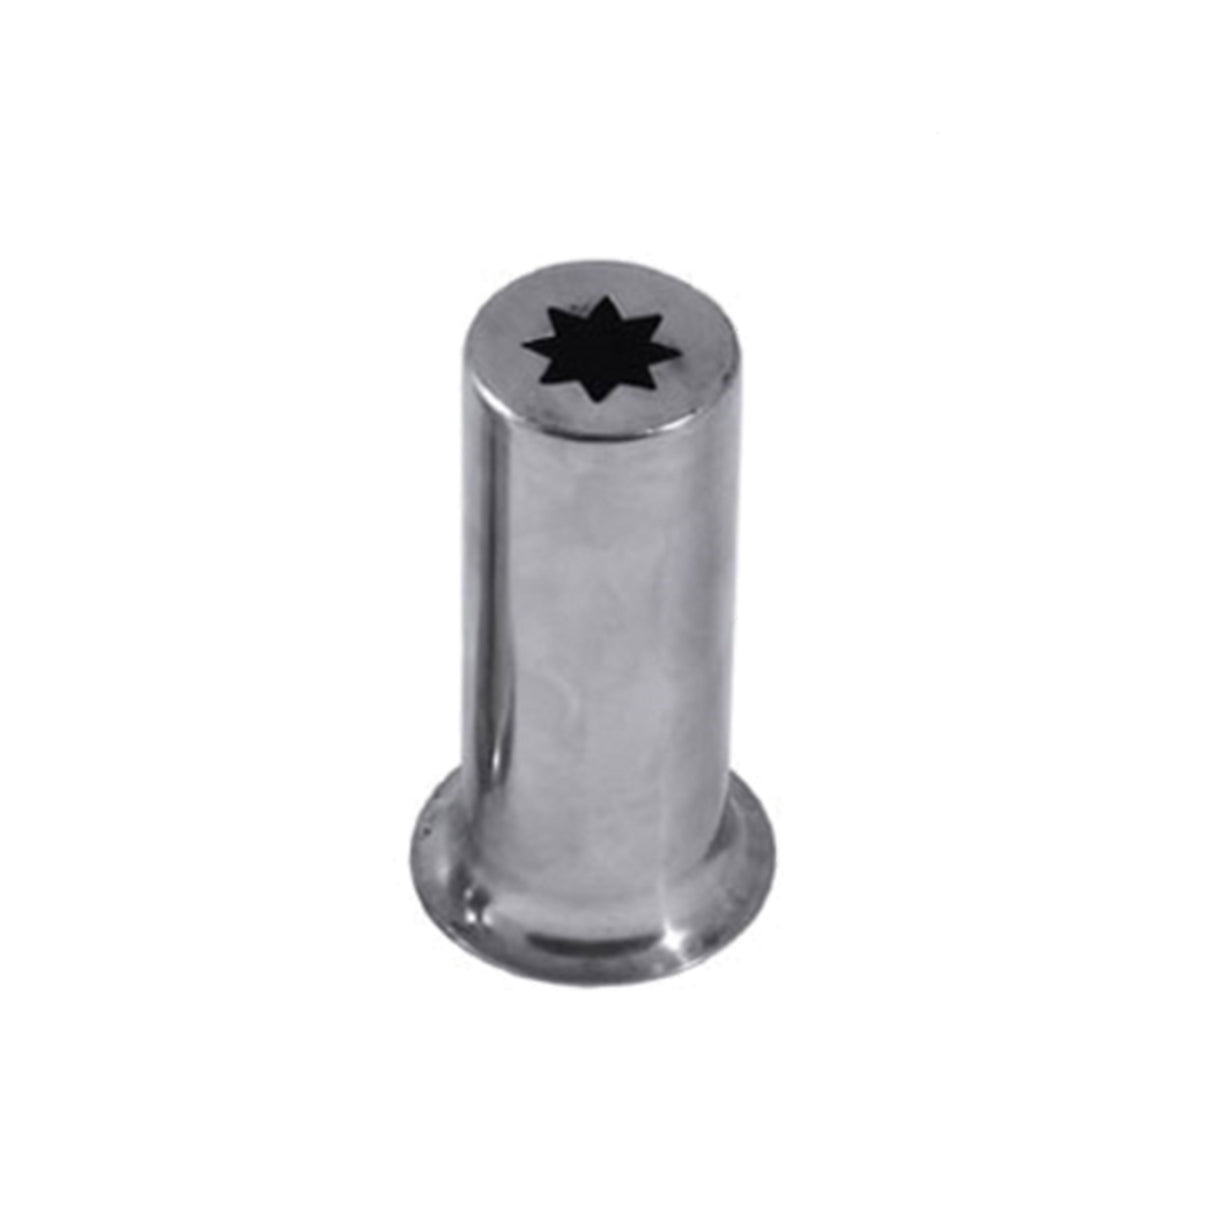 UCM-NZ2 | 1" Star - Stainless Steel Churro Nozzle